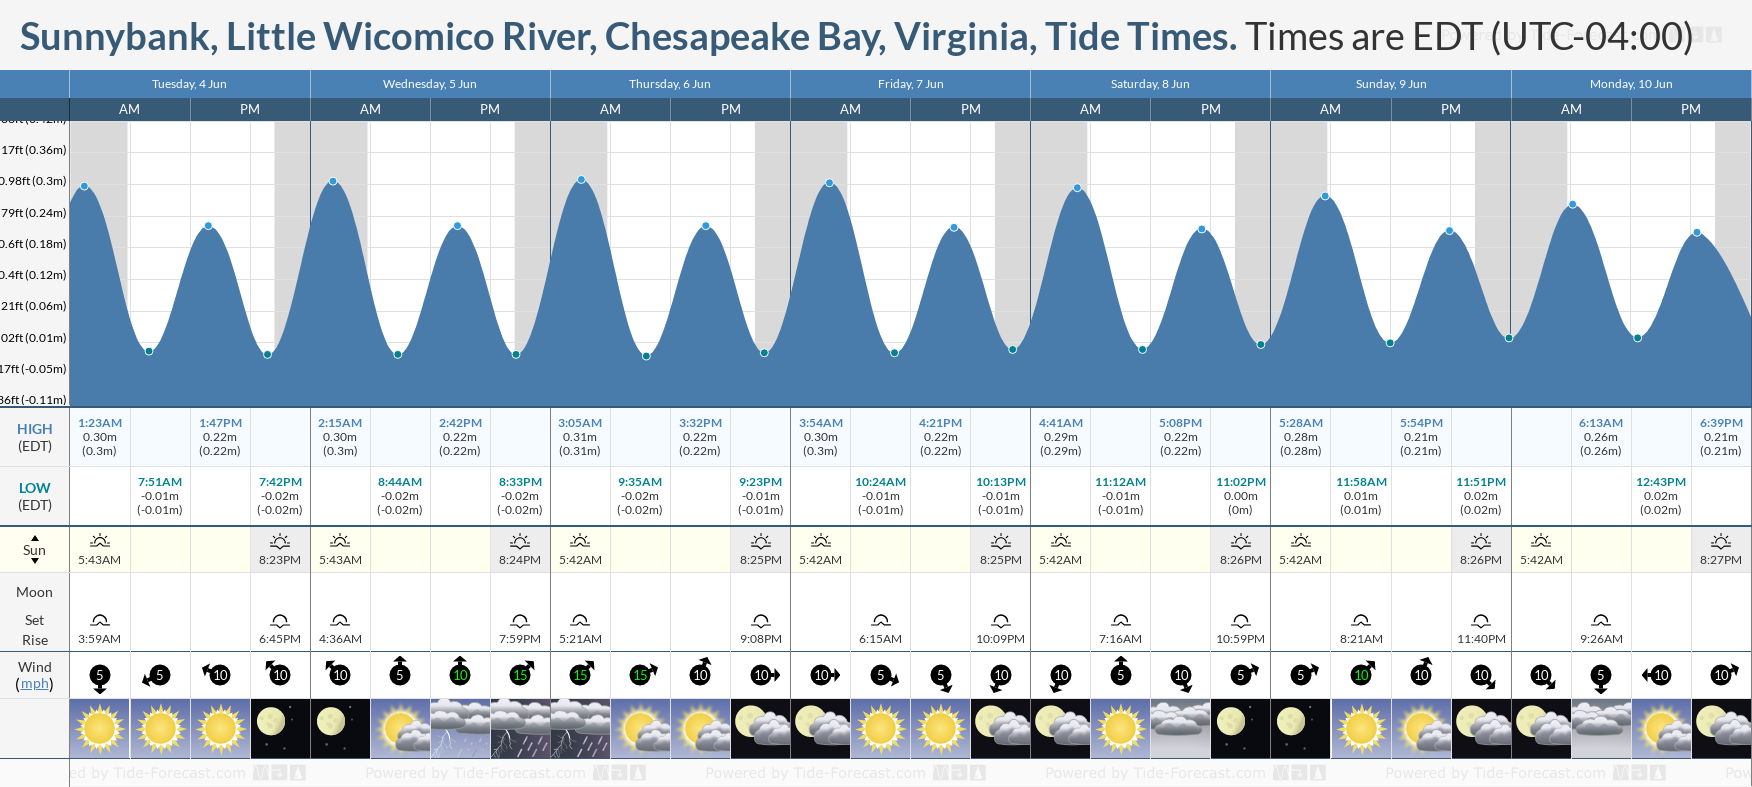 Tide Times and Tide Chart for Sunnybank, Little River